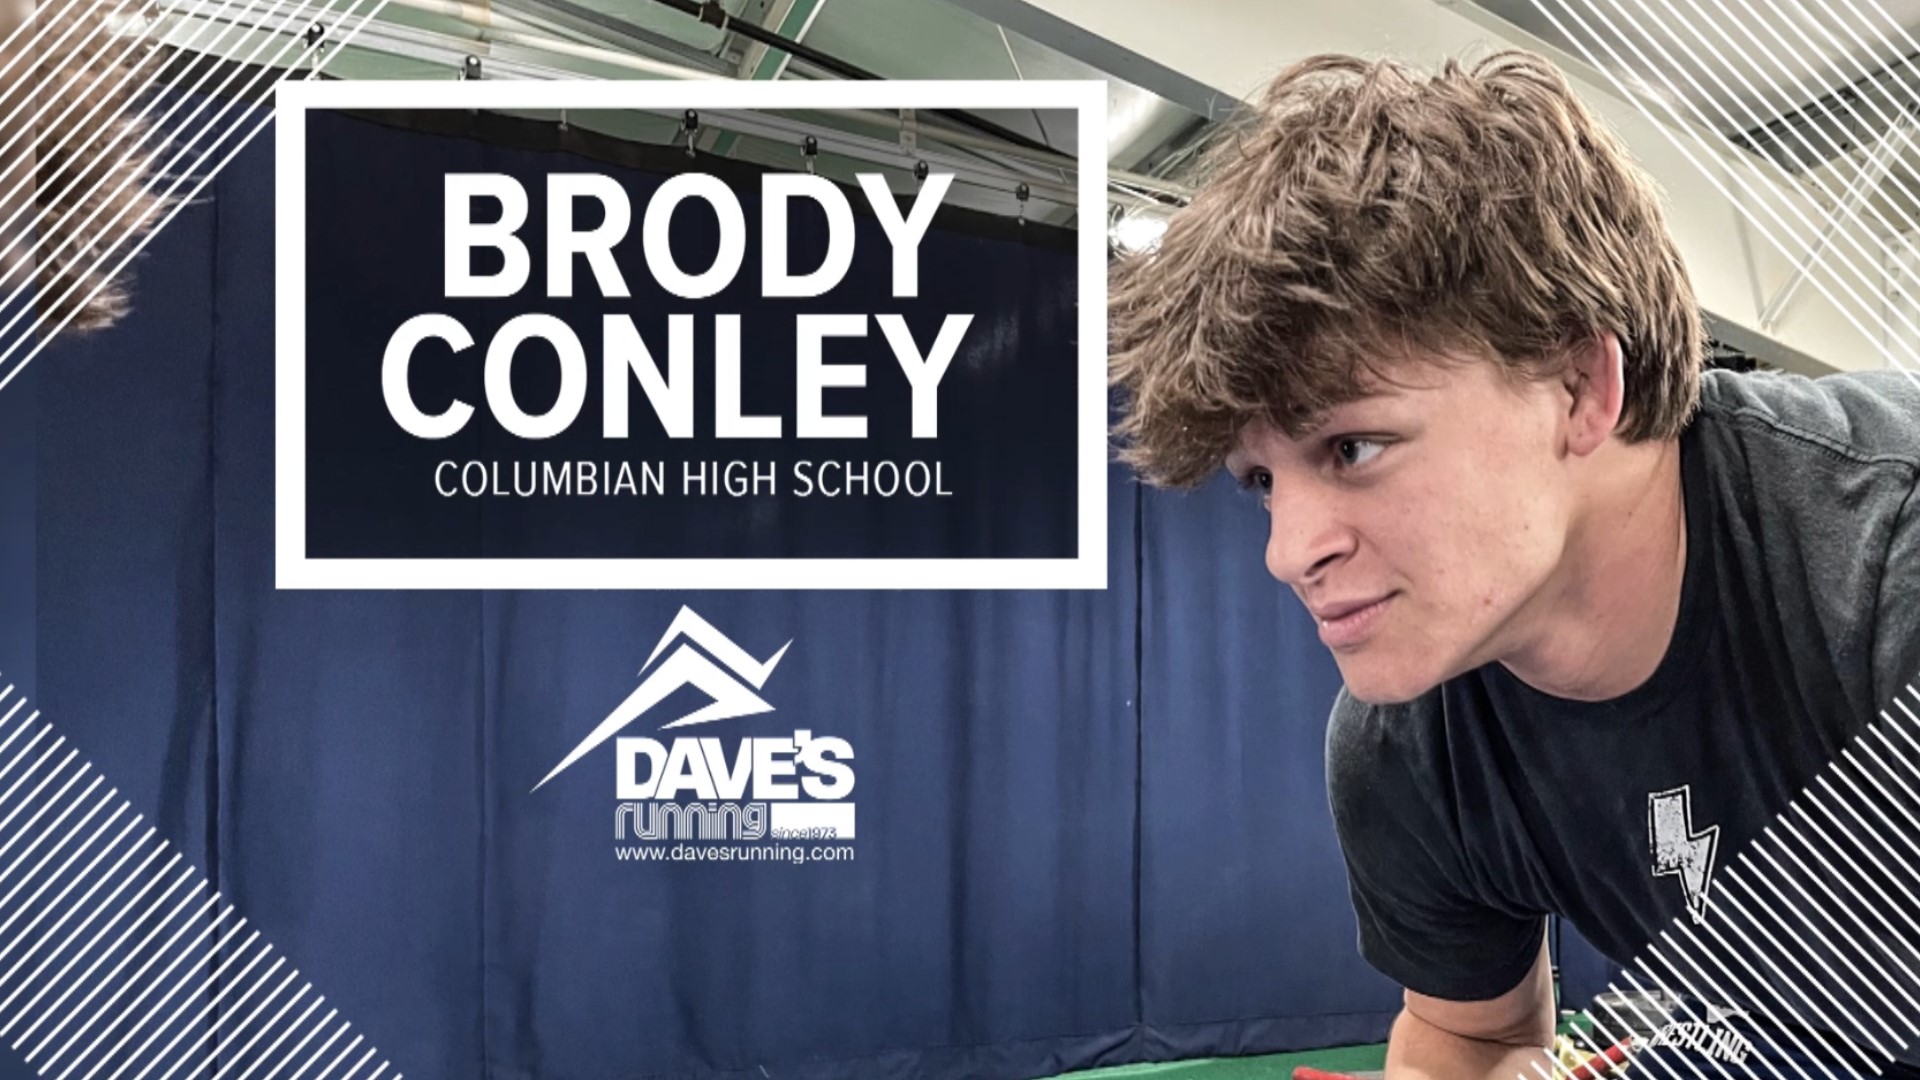 Conley captured his second straight state title, ending his career on a 119-match winning streak for the Tornadoes.